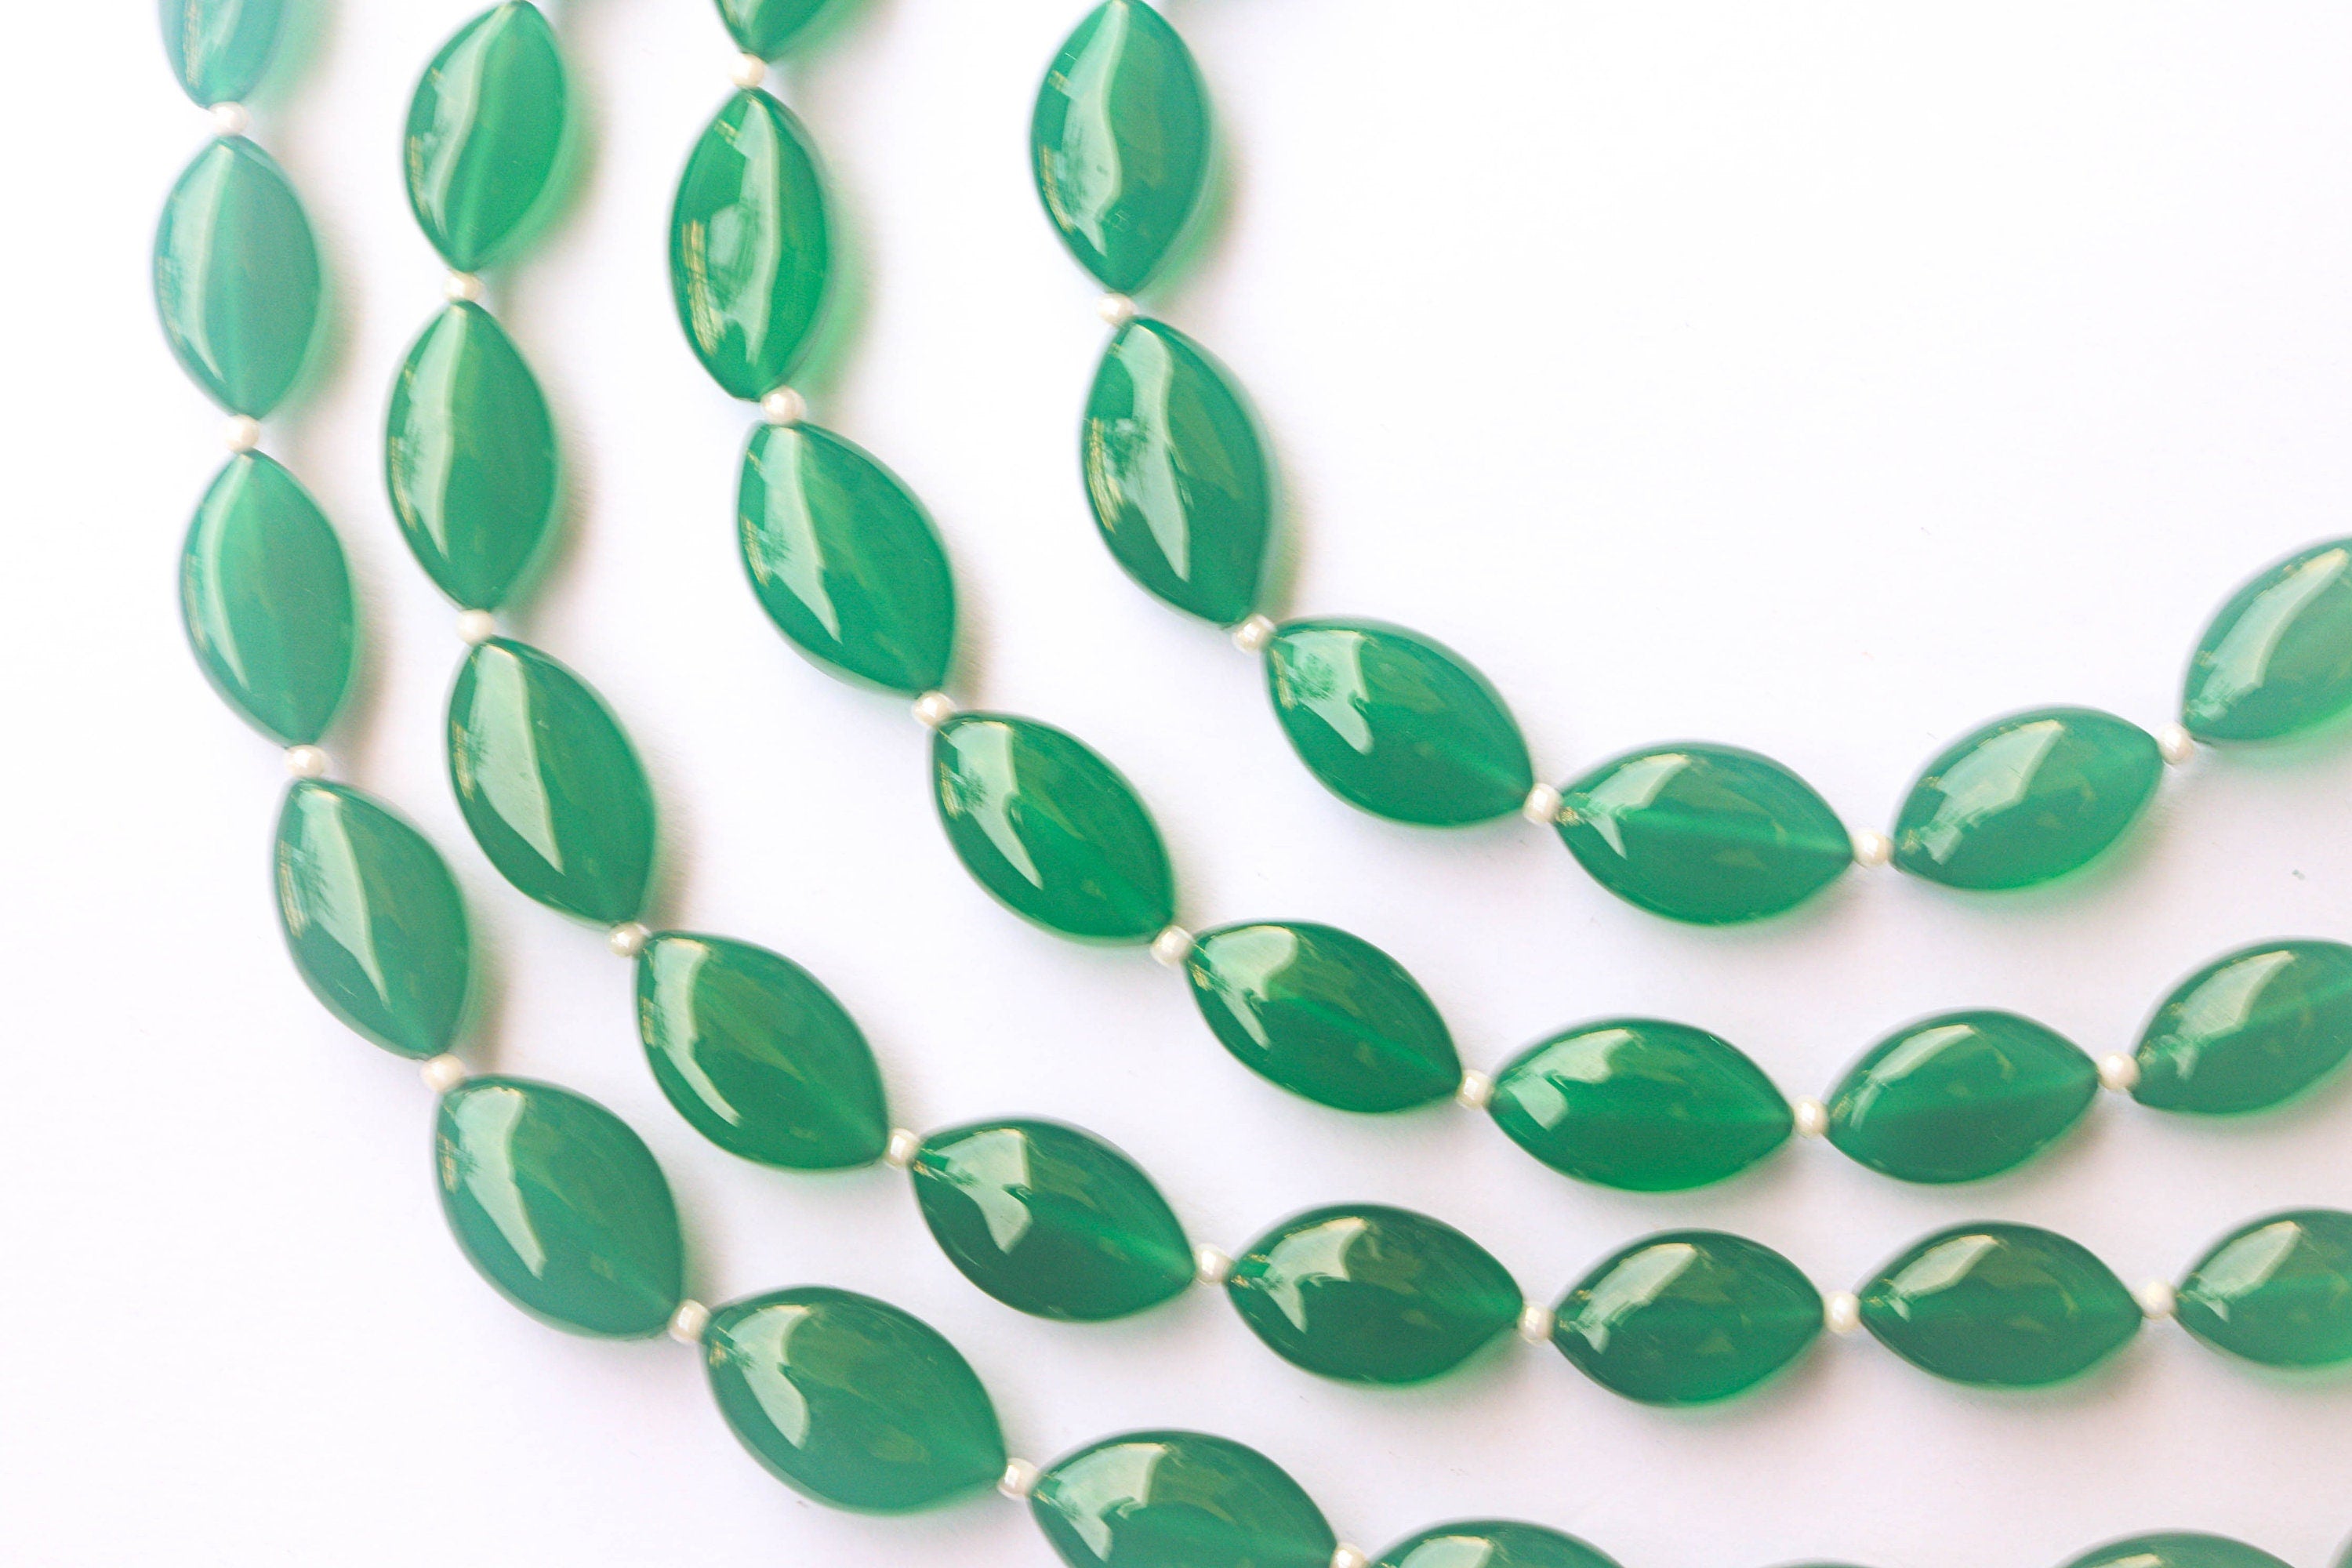 Green Onyx Marquise Shape Beads | 7x12mm to 10x16mm | 15 Pieces | 9 inch String | Gemstone Beads for Jewelry making | Beadsforyourjewelry